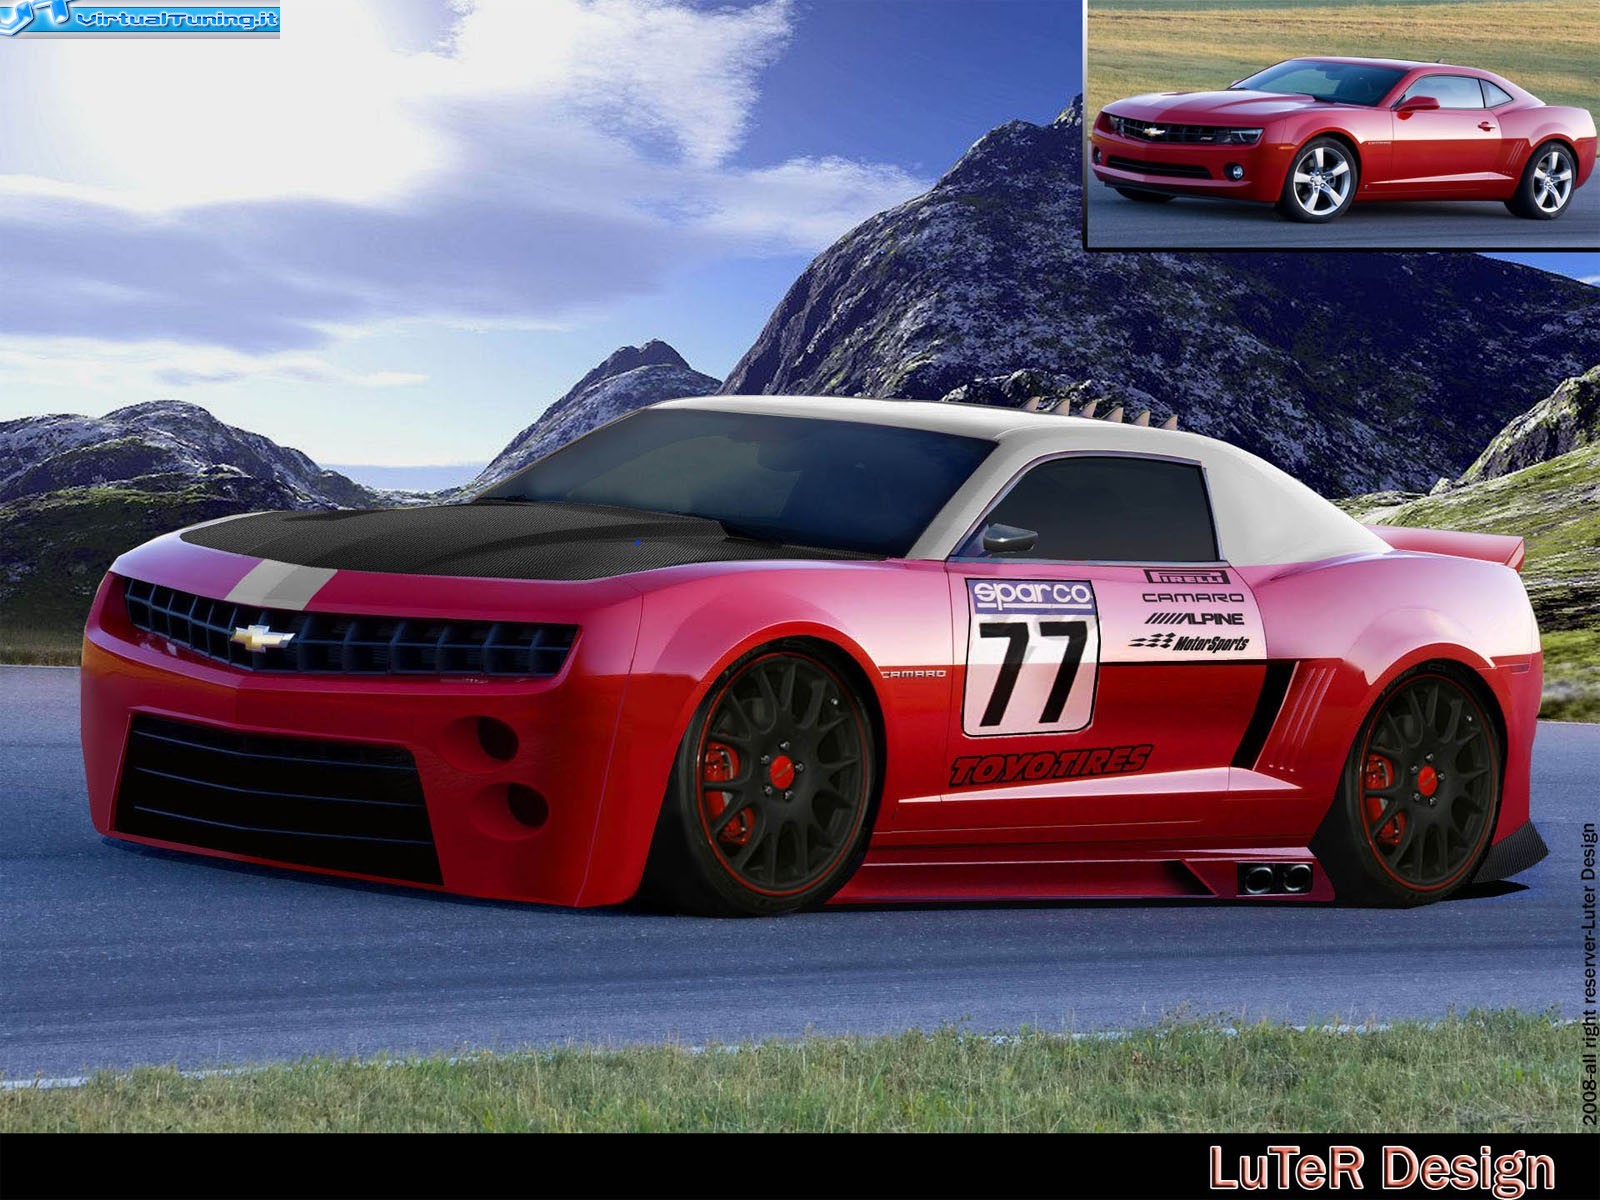 VirtualTuning CHEVROLET Camaro RS by Luter